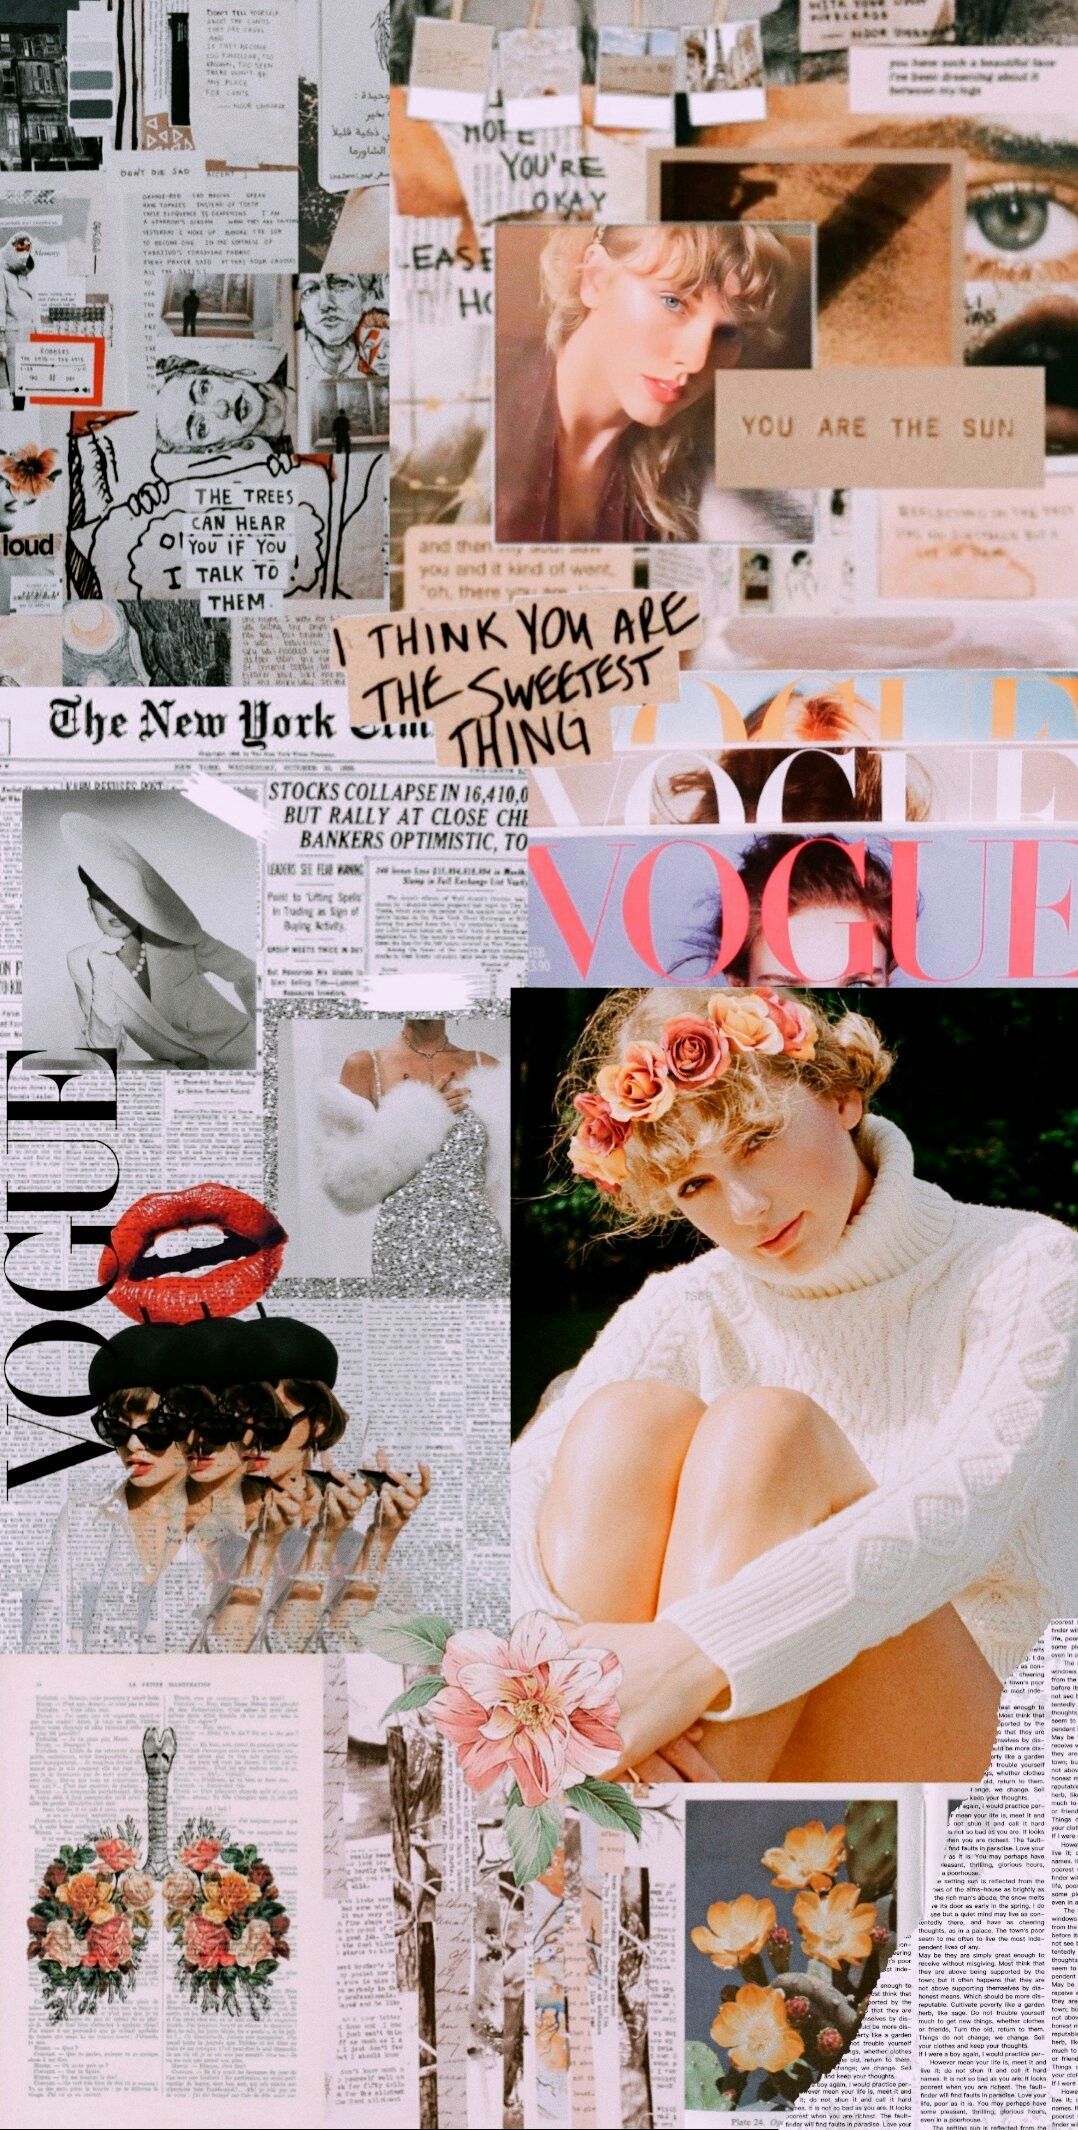 A collage of pictures and words - Taylor Swift